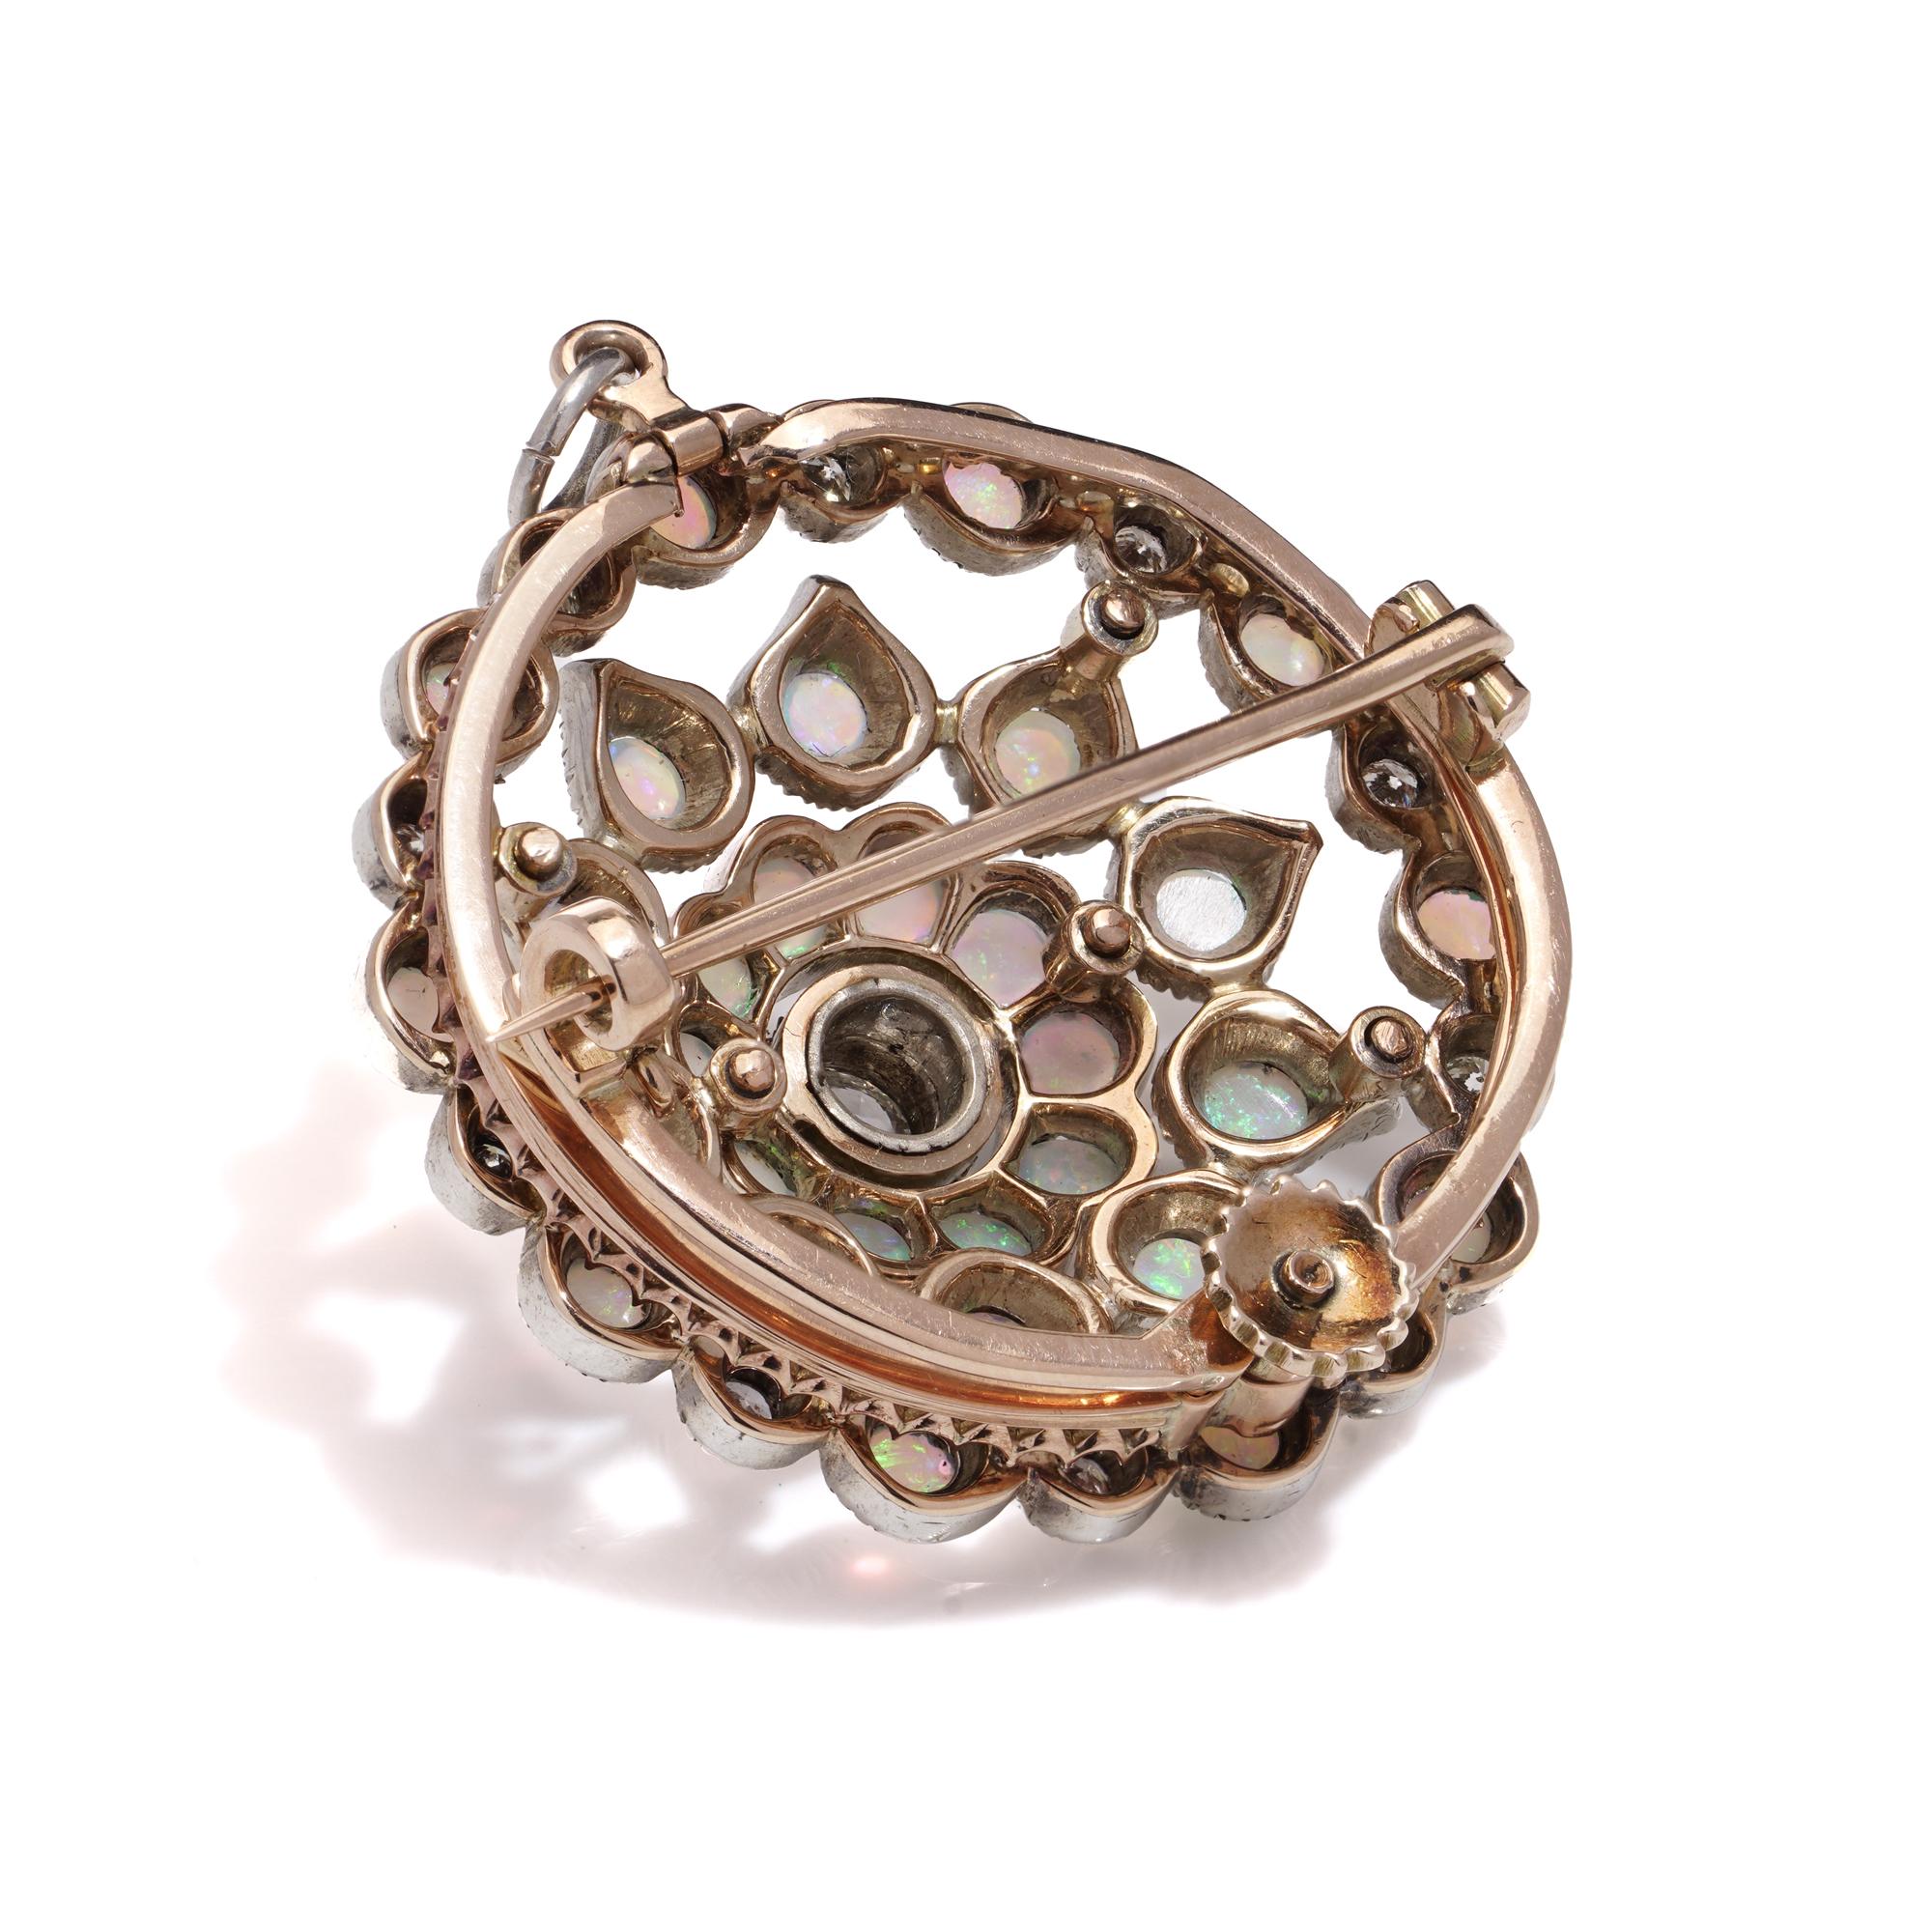 Edwardian 9kt rose gold and silver round Opal and diamond brooch/pendant In Excellent Condition For Sale In Braintree, GB